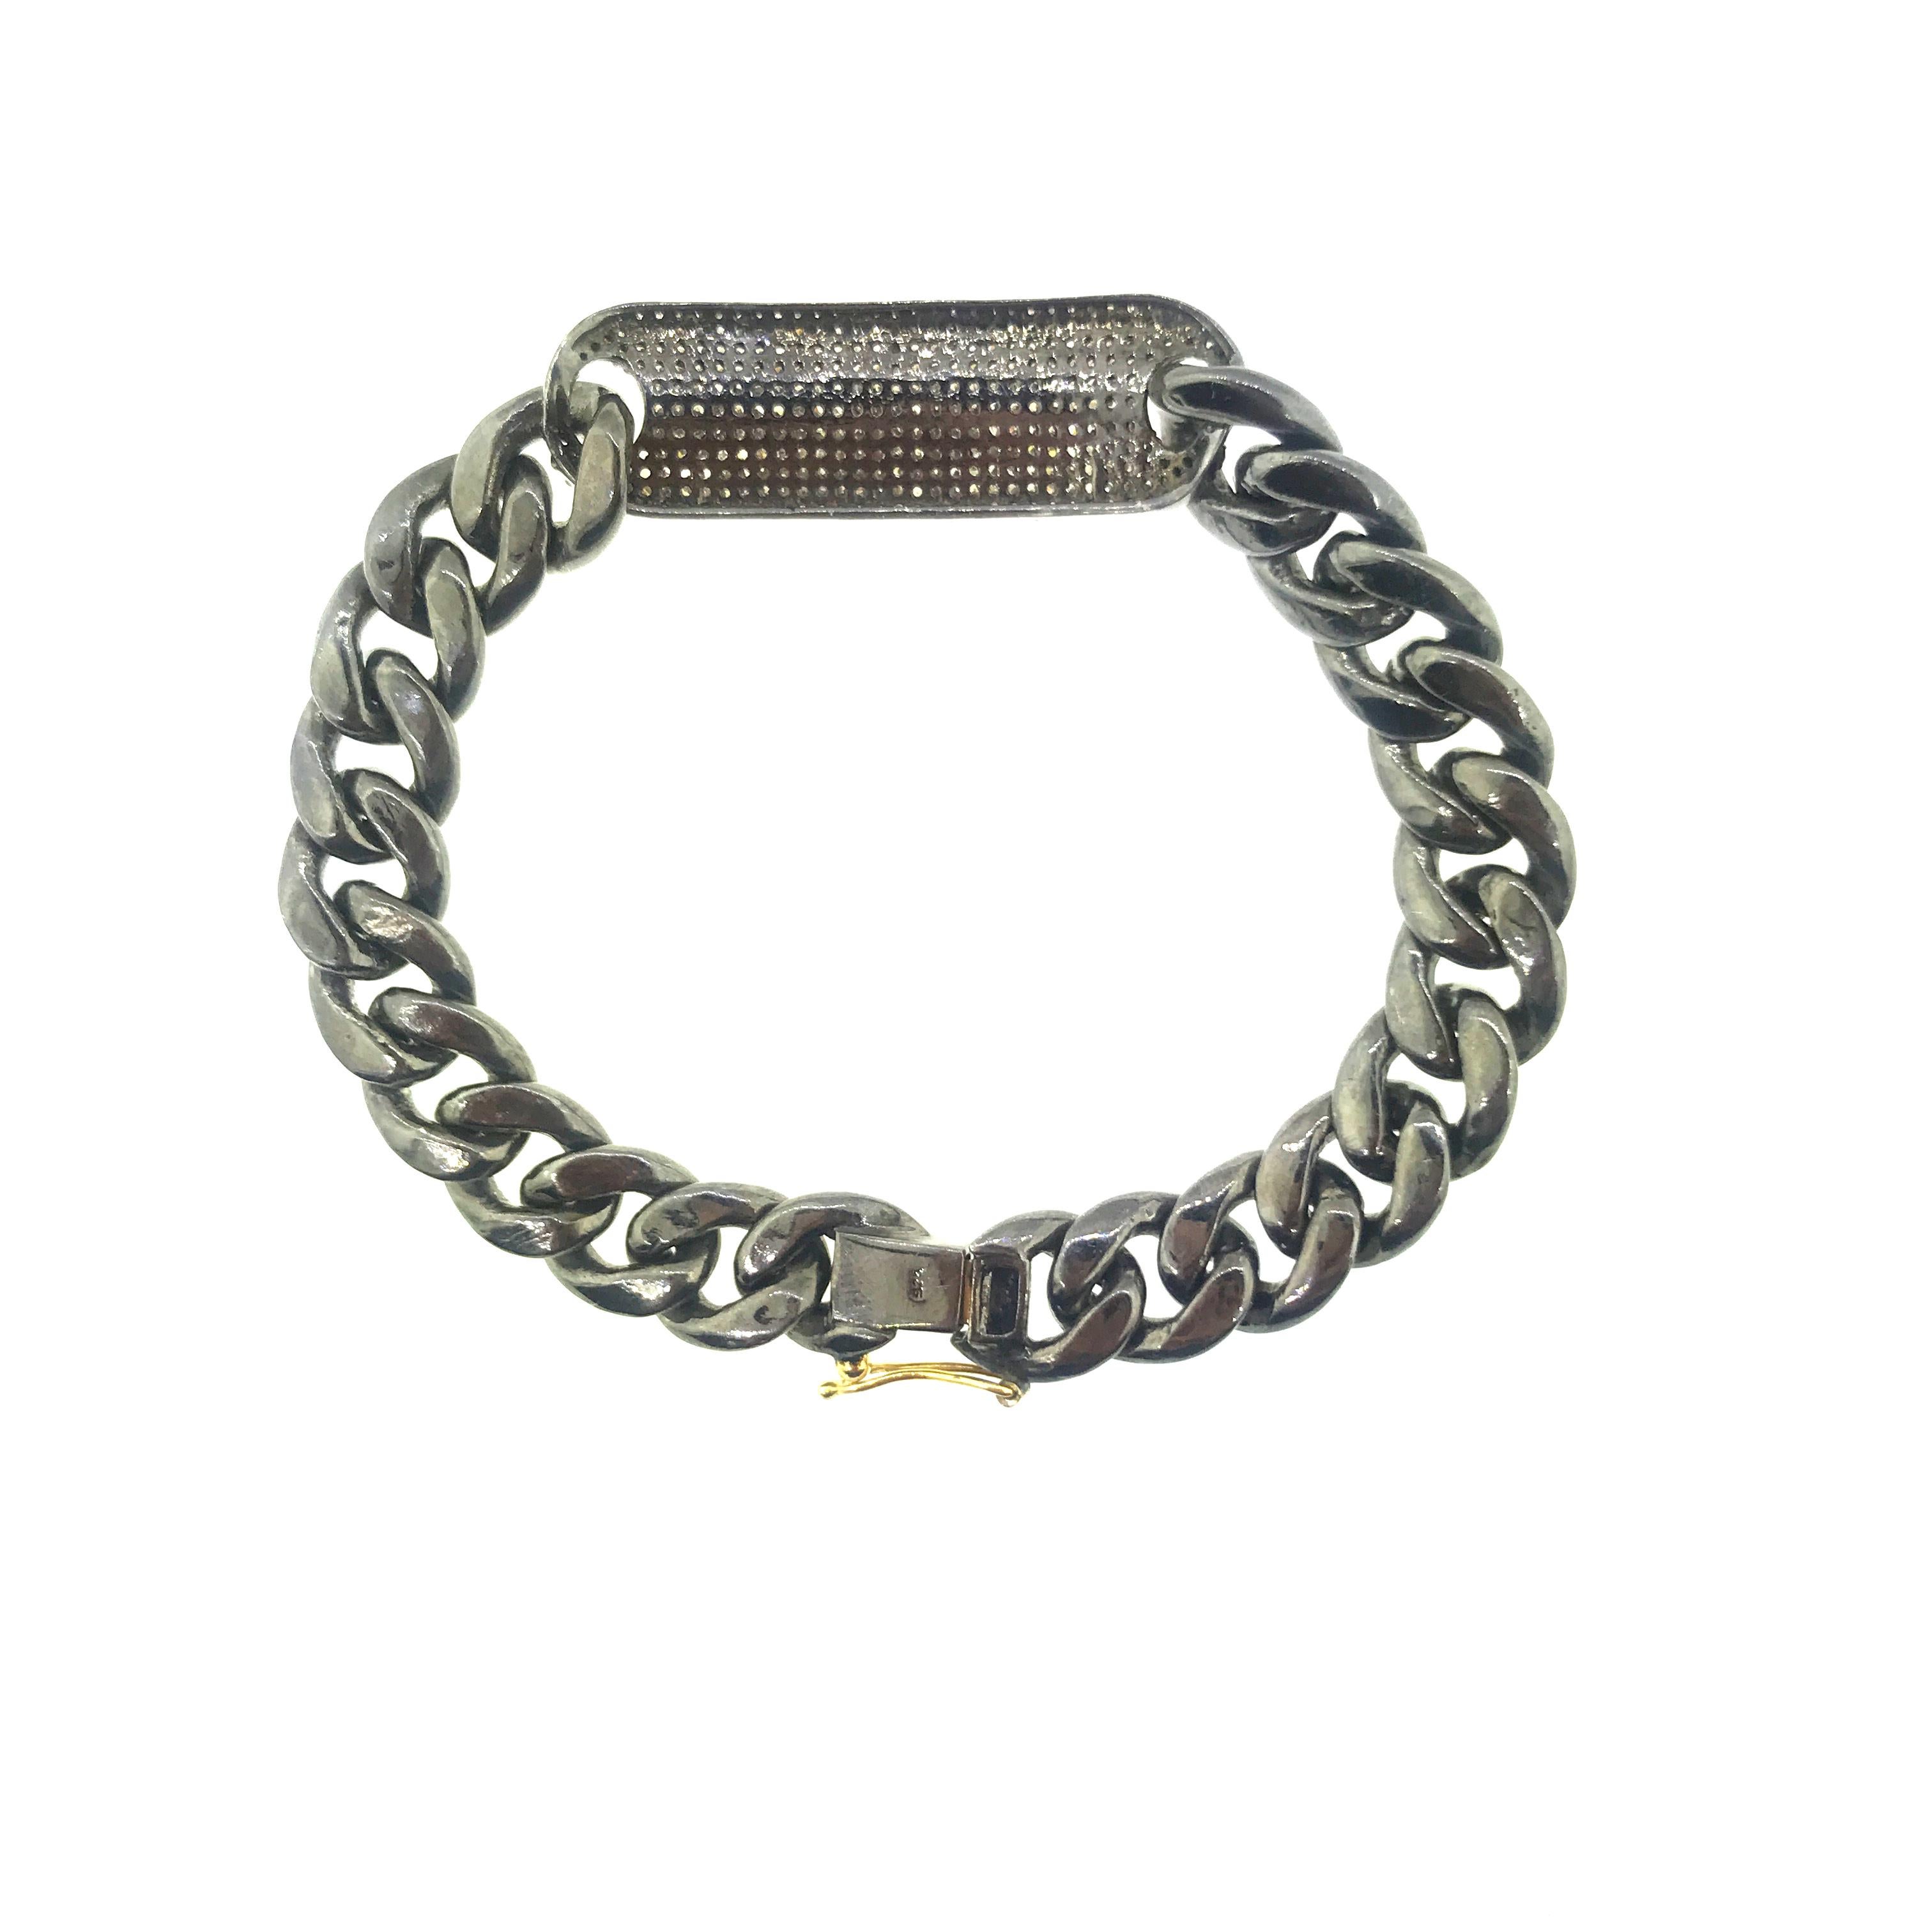 2.13 Carat Pave Diamond ID Bracelet Oxidized Sterling Silver, 14 Karat Gold In New Condition For Sale In New York, NY